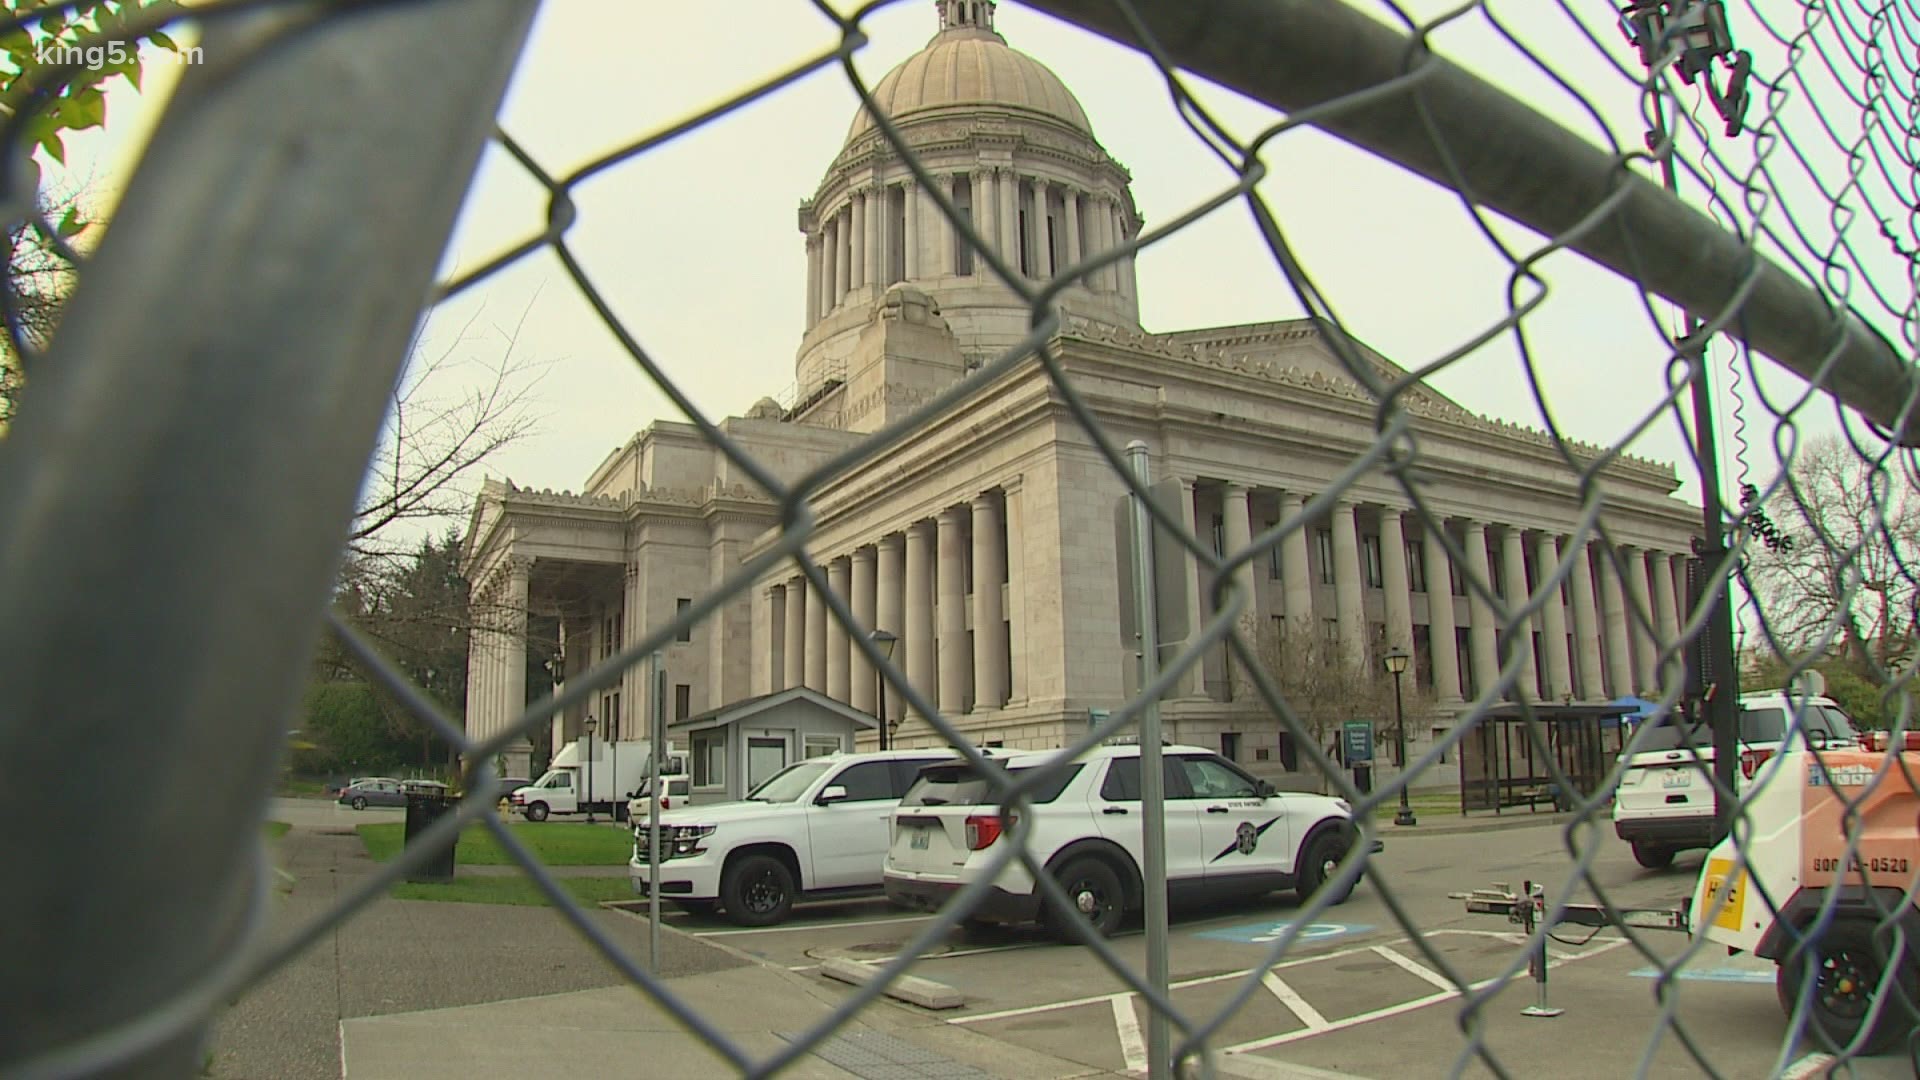 The patrol's increased presence at the state Capitol cost more than $1.5 million over the past 13 days.